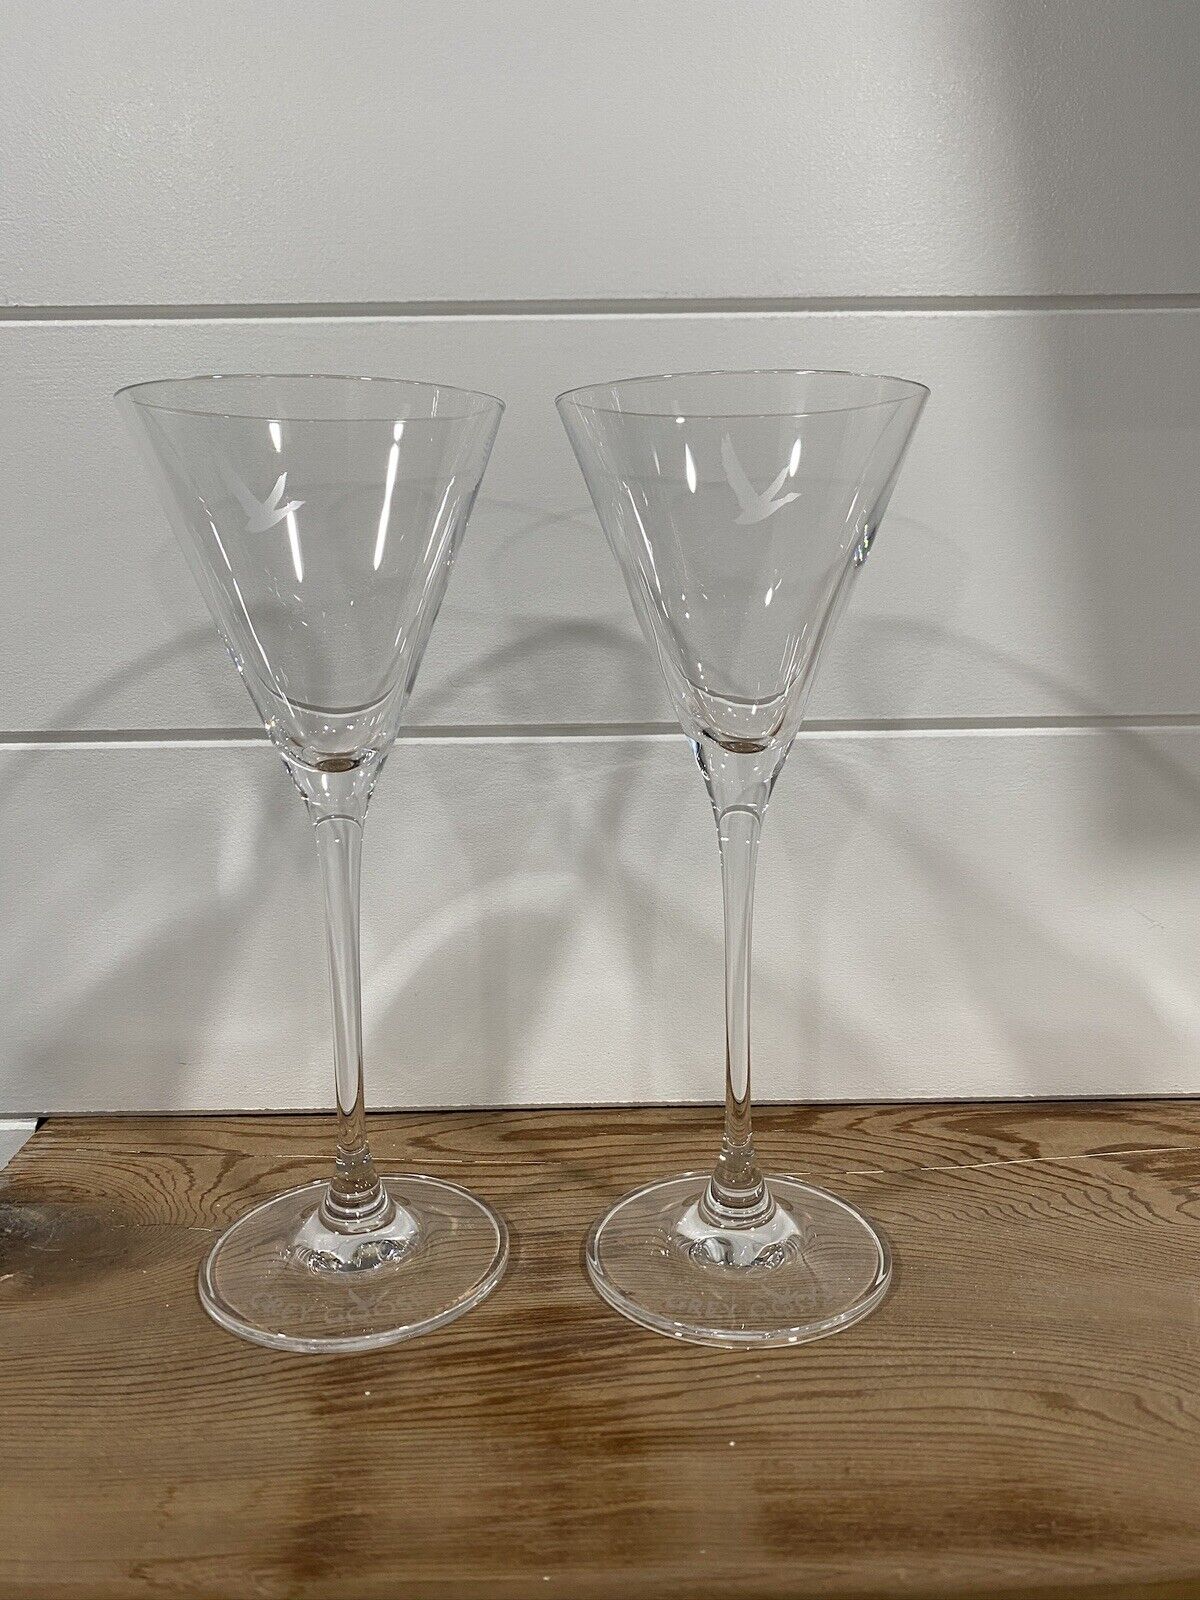 New 2023 Limited Edition Grey Goose Crystal Martini Glasses Set of 2 Glasses